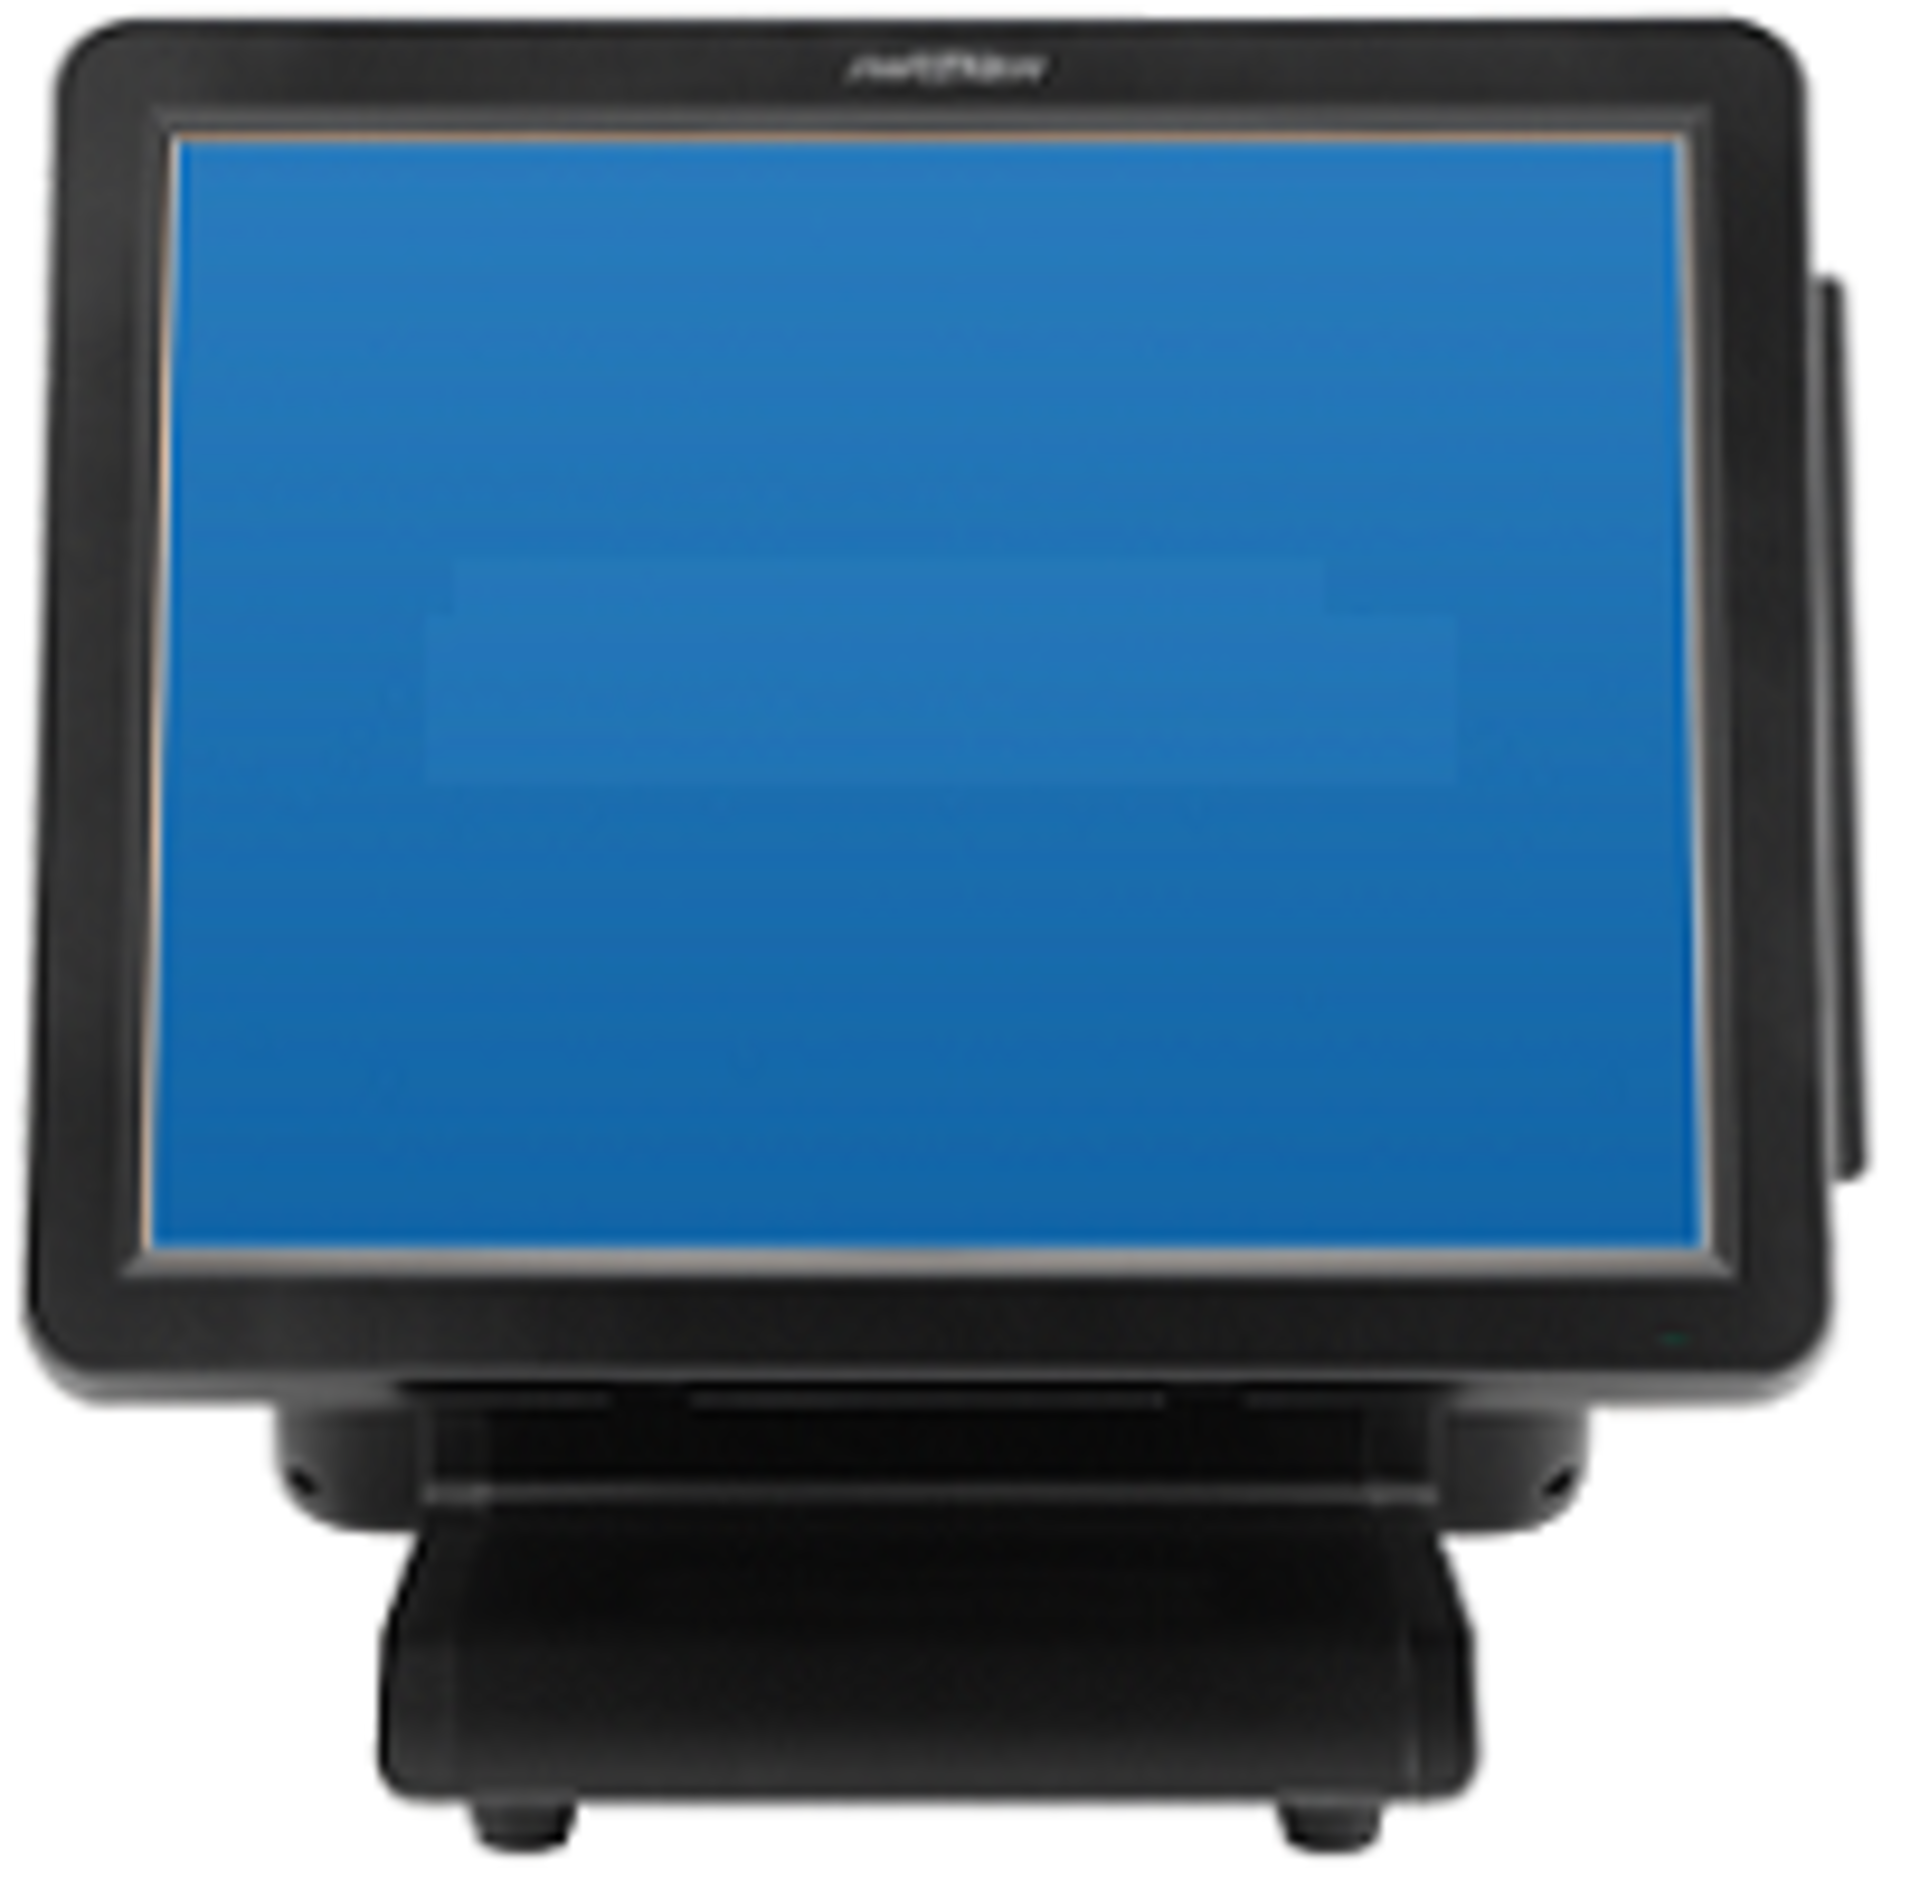 1 x Partner Tech SP-630 All-in-One Touch Screen EPOS Terminal With Star TSP100 Receipt Printer